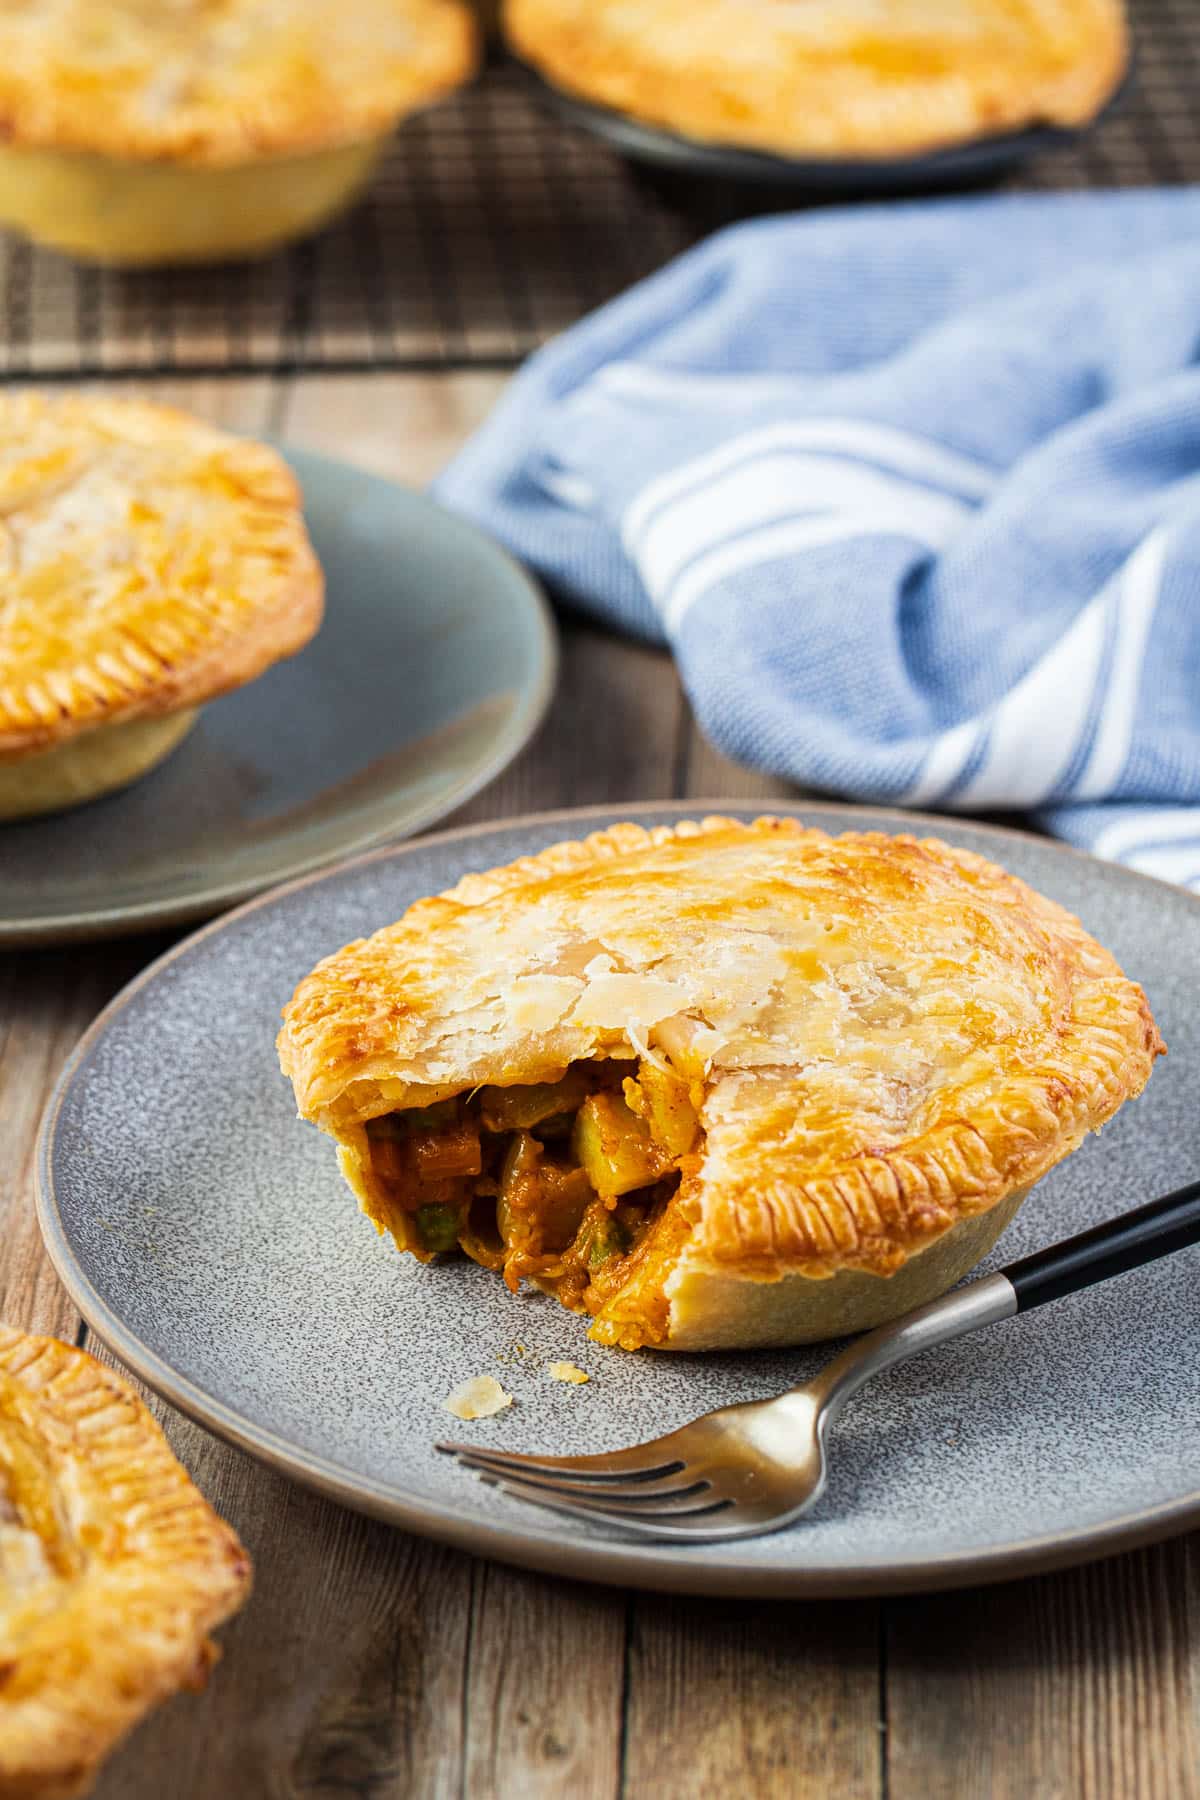 vegetable curry pies on a table with plates